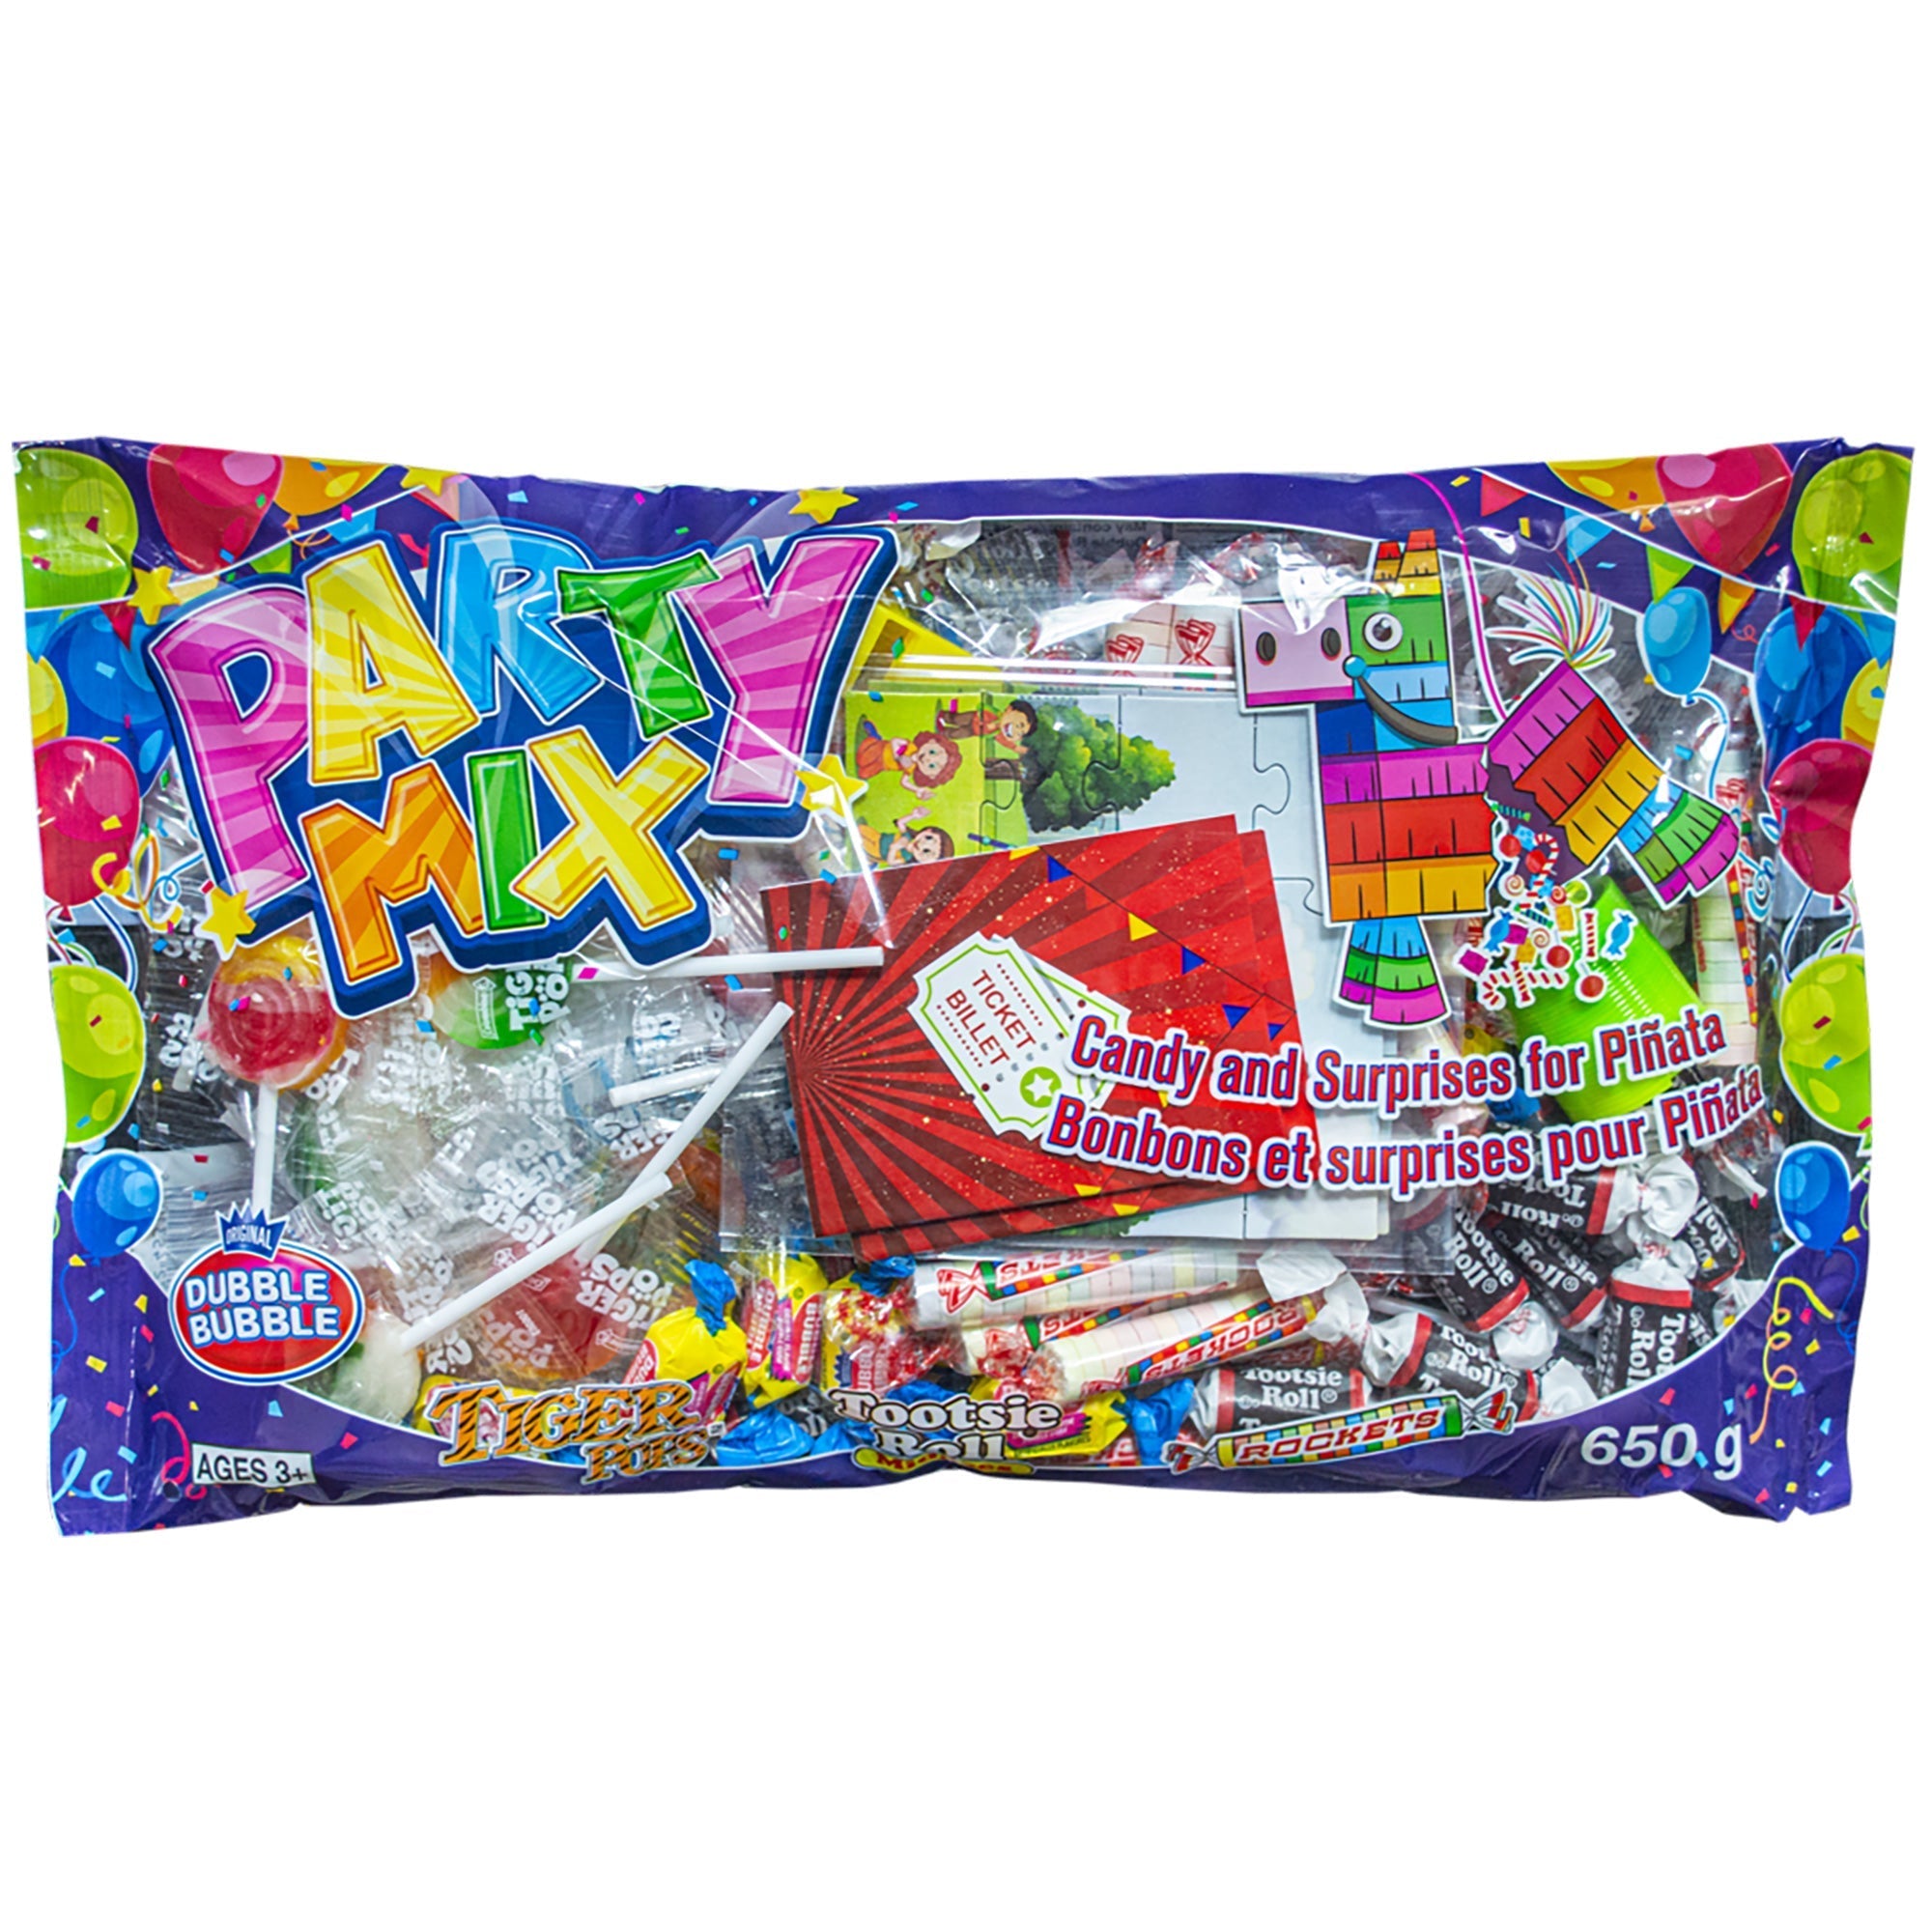 Candy Party Mix, 650g, 1 Count